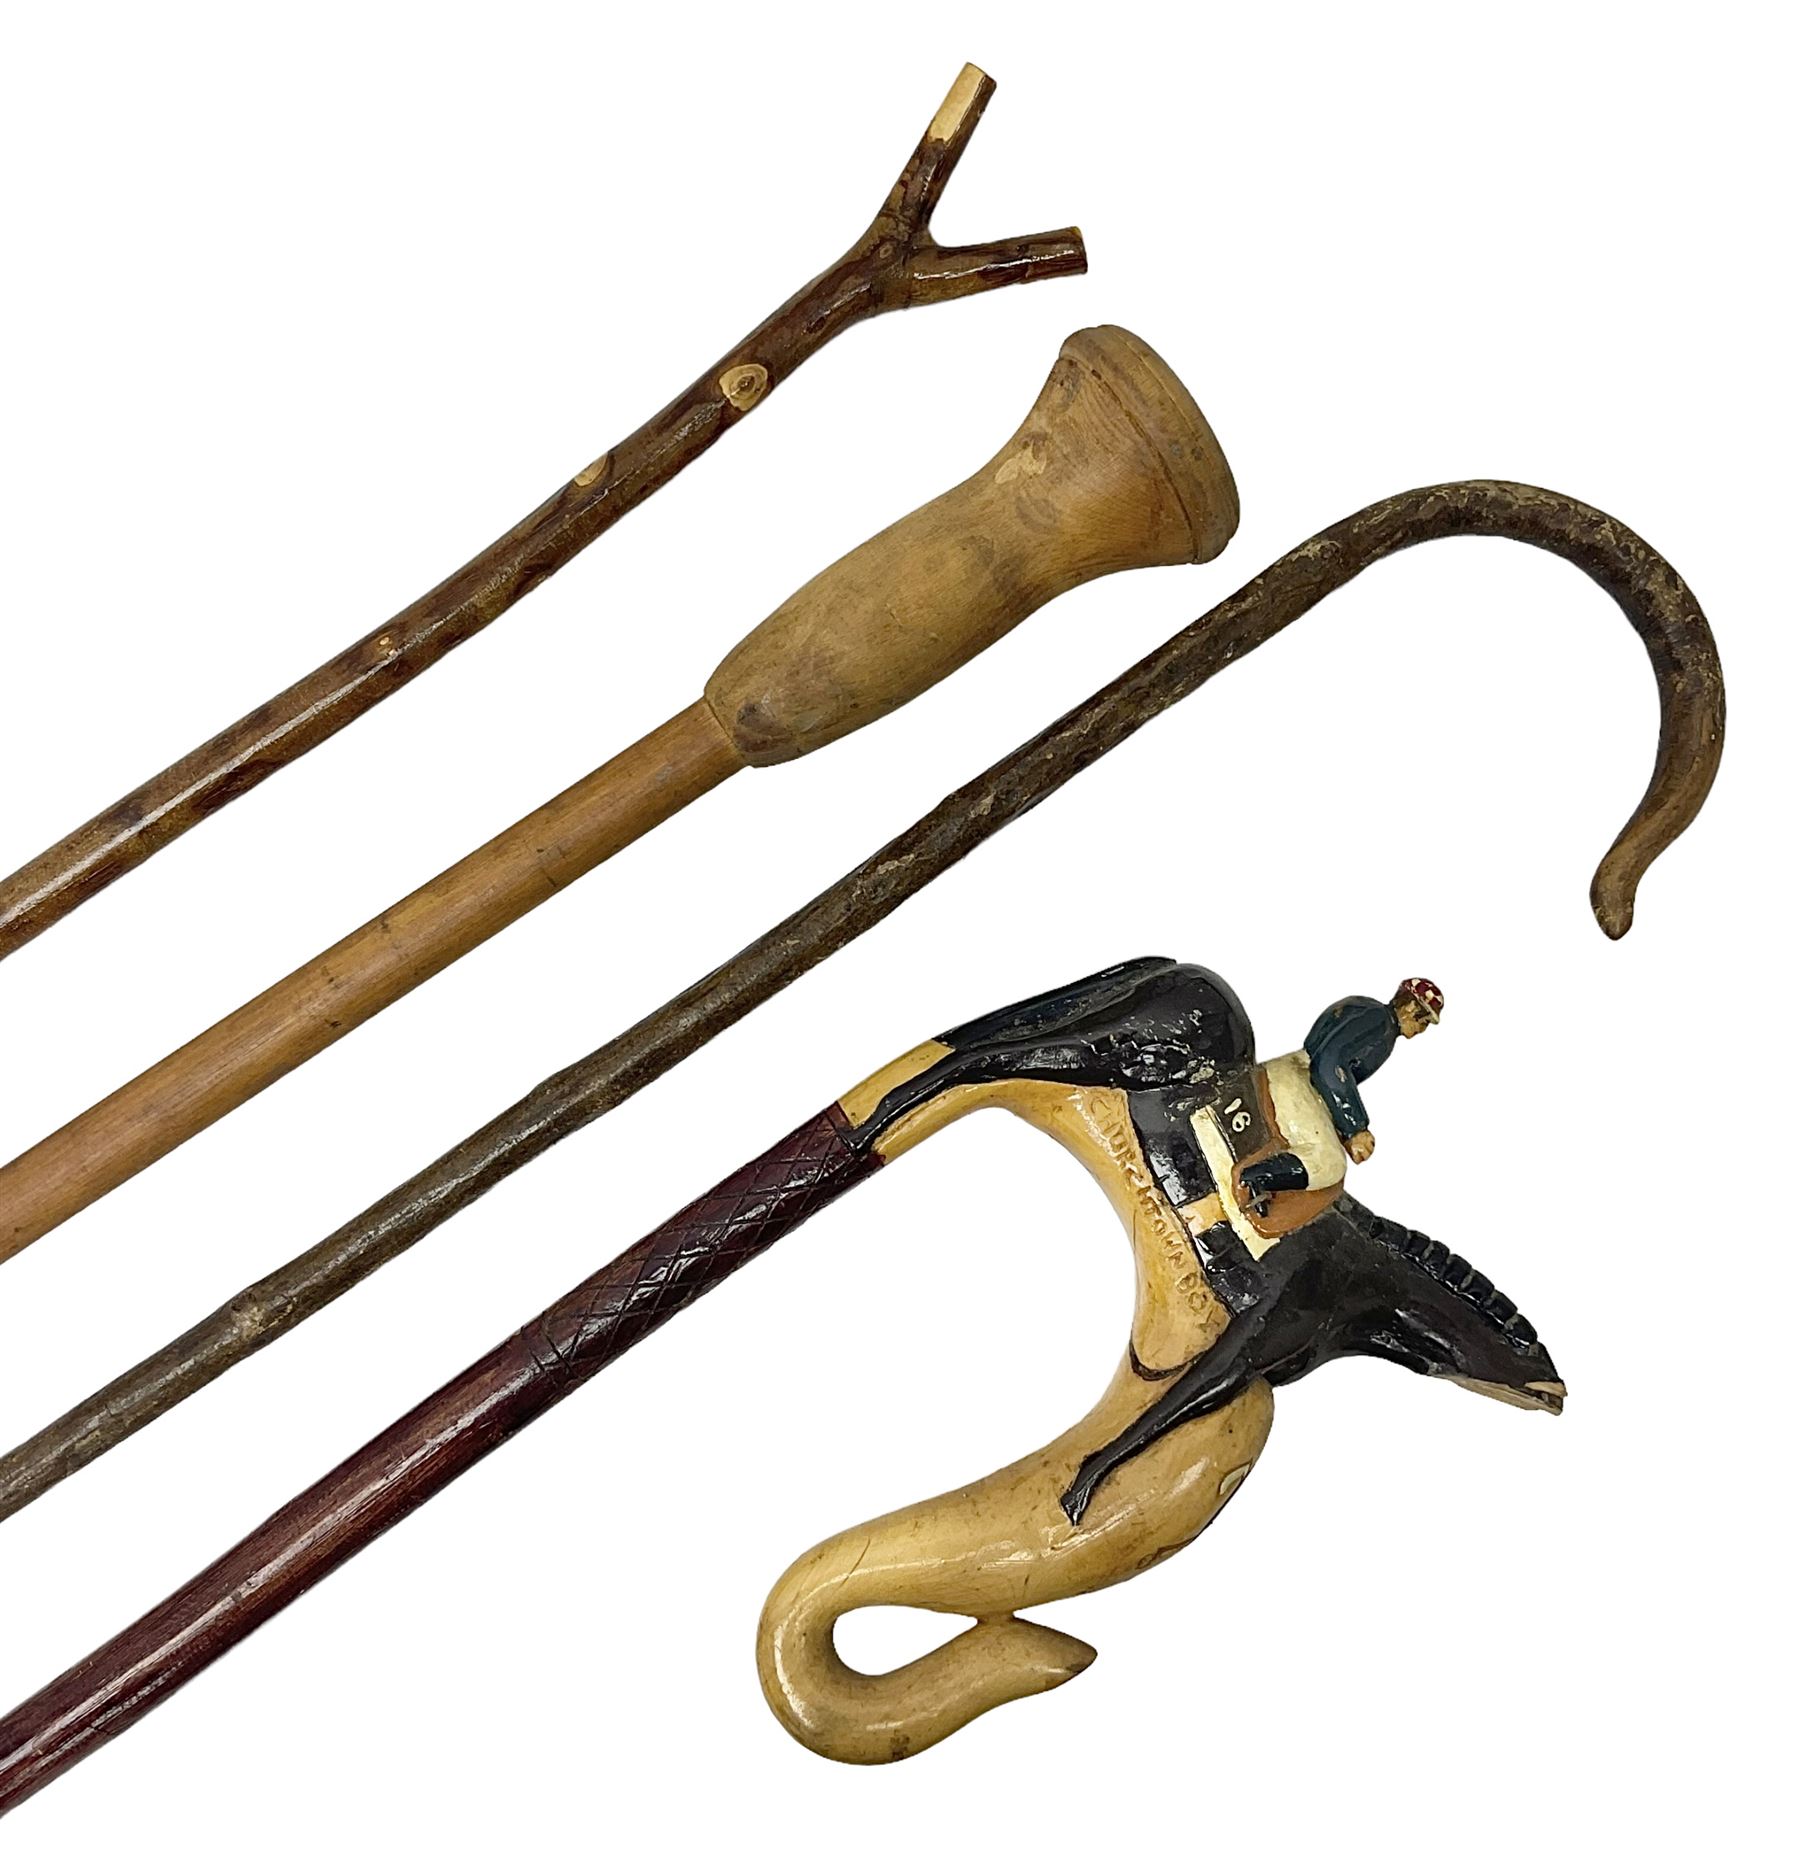 Four late 19th/early 20th century walking canes